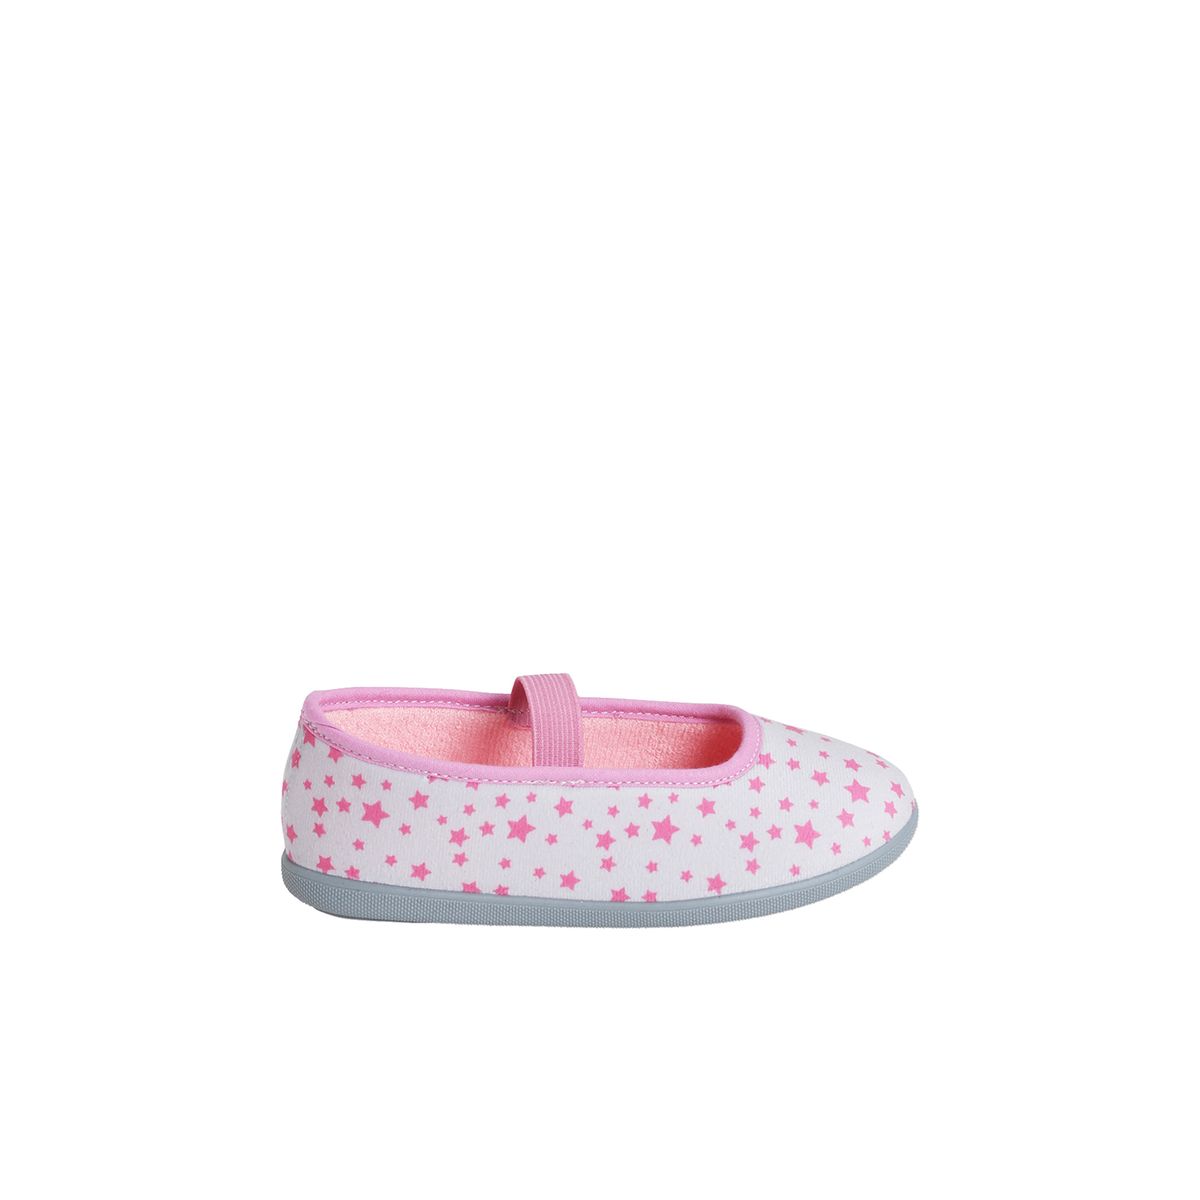 Chaussures en toile style babies La Redoute Fille Chaussures Ballerines 